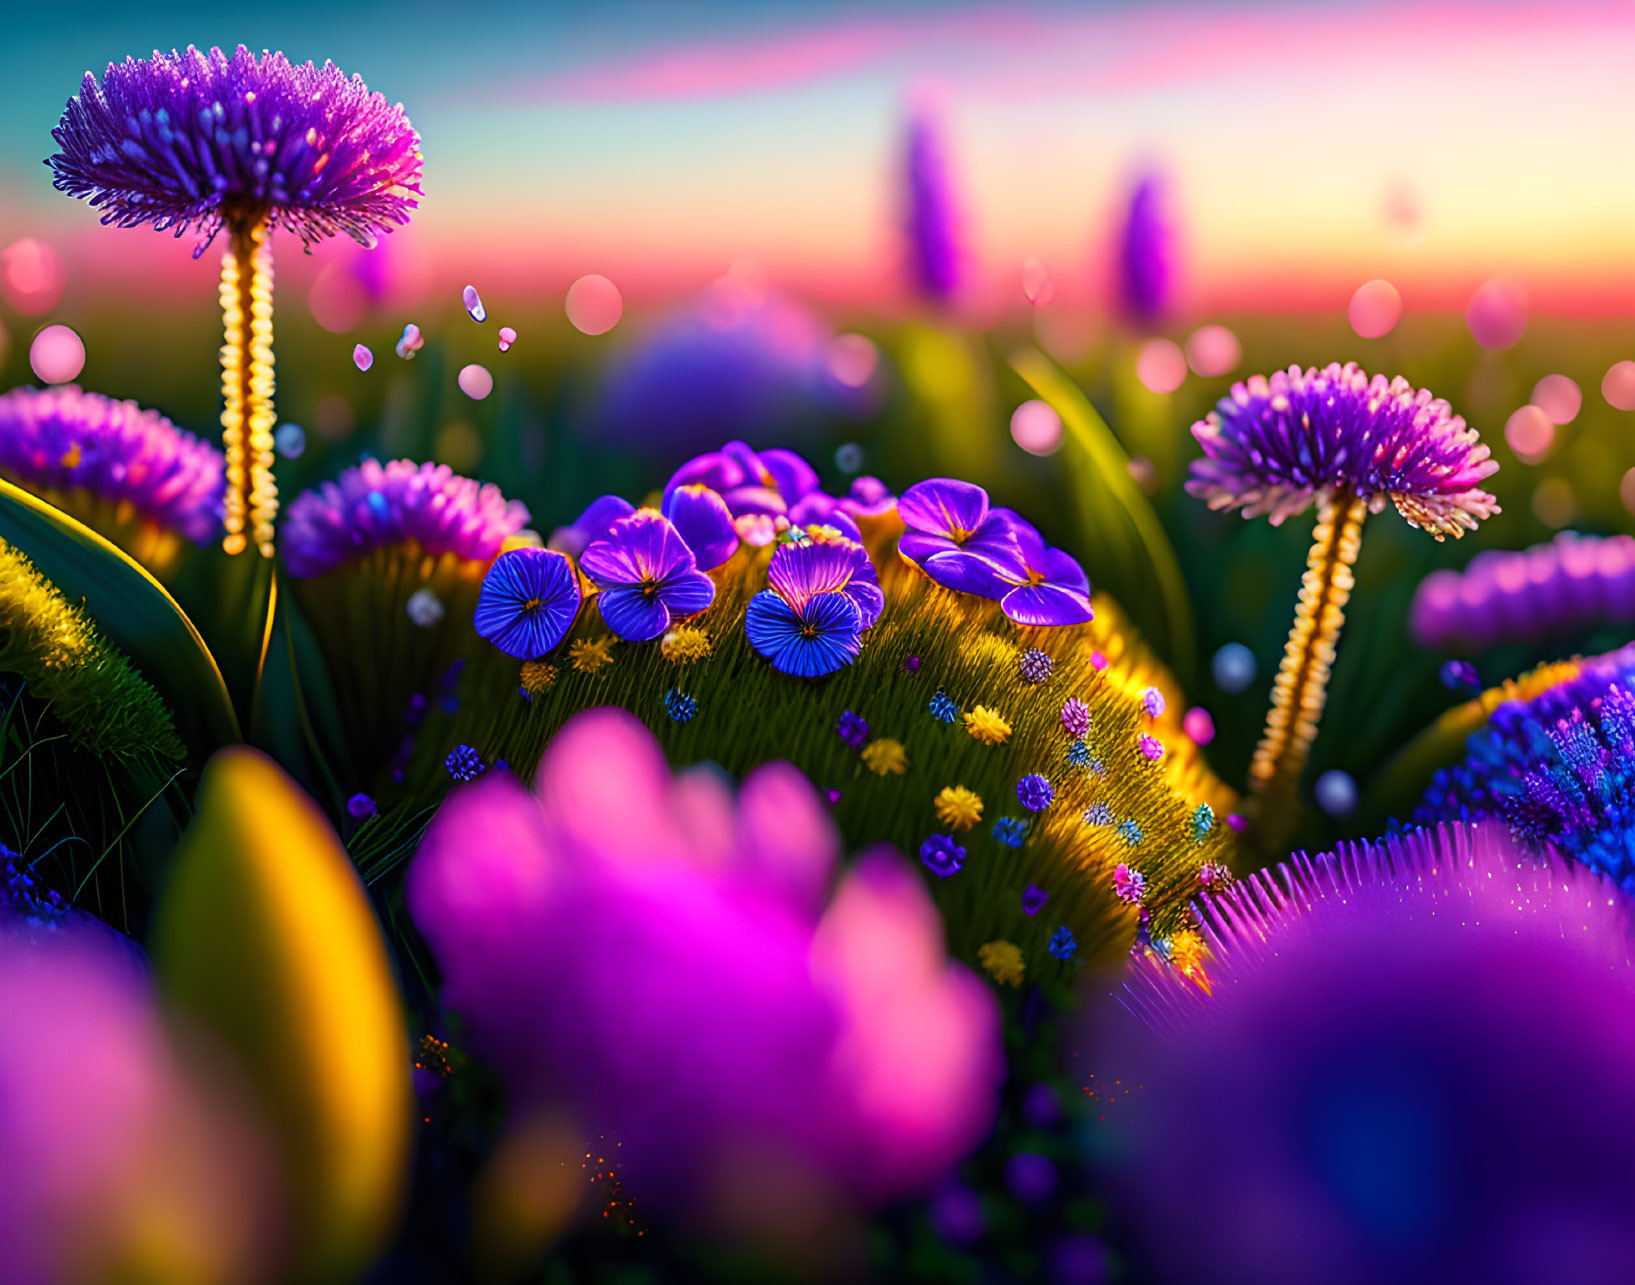 Colorful purple and blue flowers in soft-focus sunrise or sunset setting